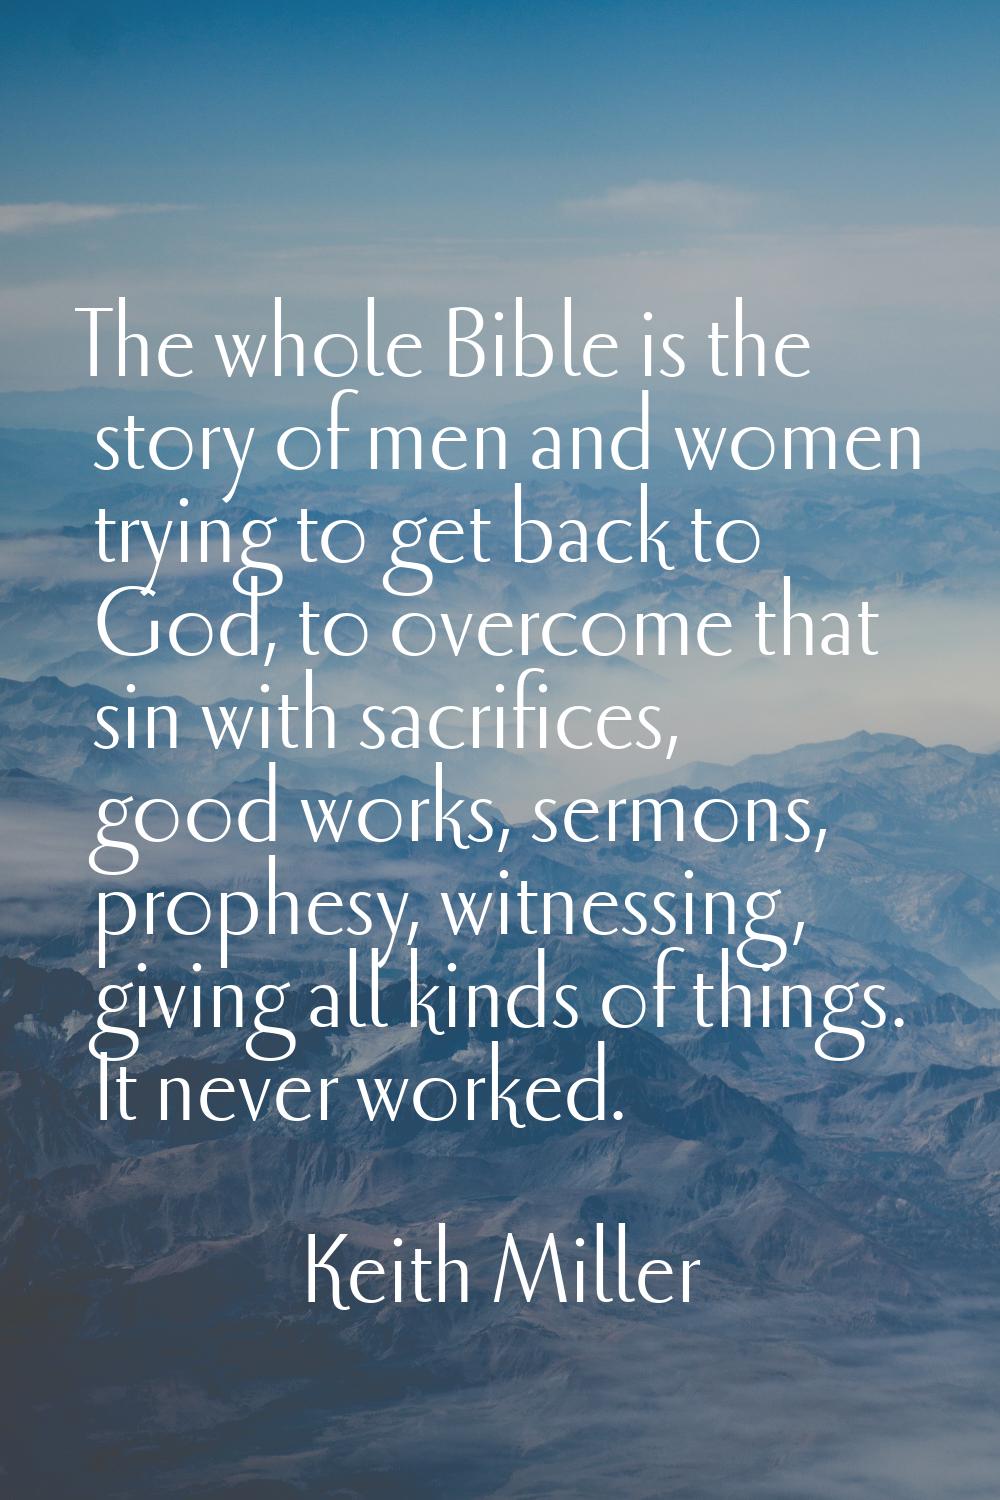 The whole Bible is the story of men and women trying to get back to God, to overcome that sin with 